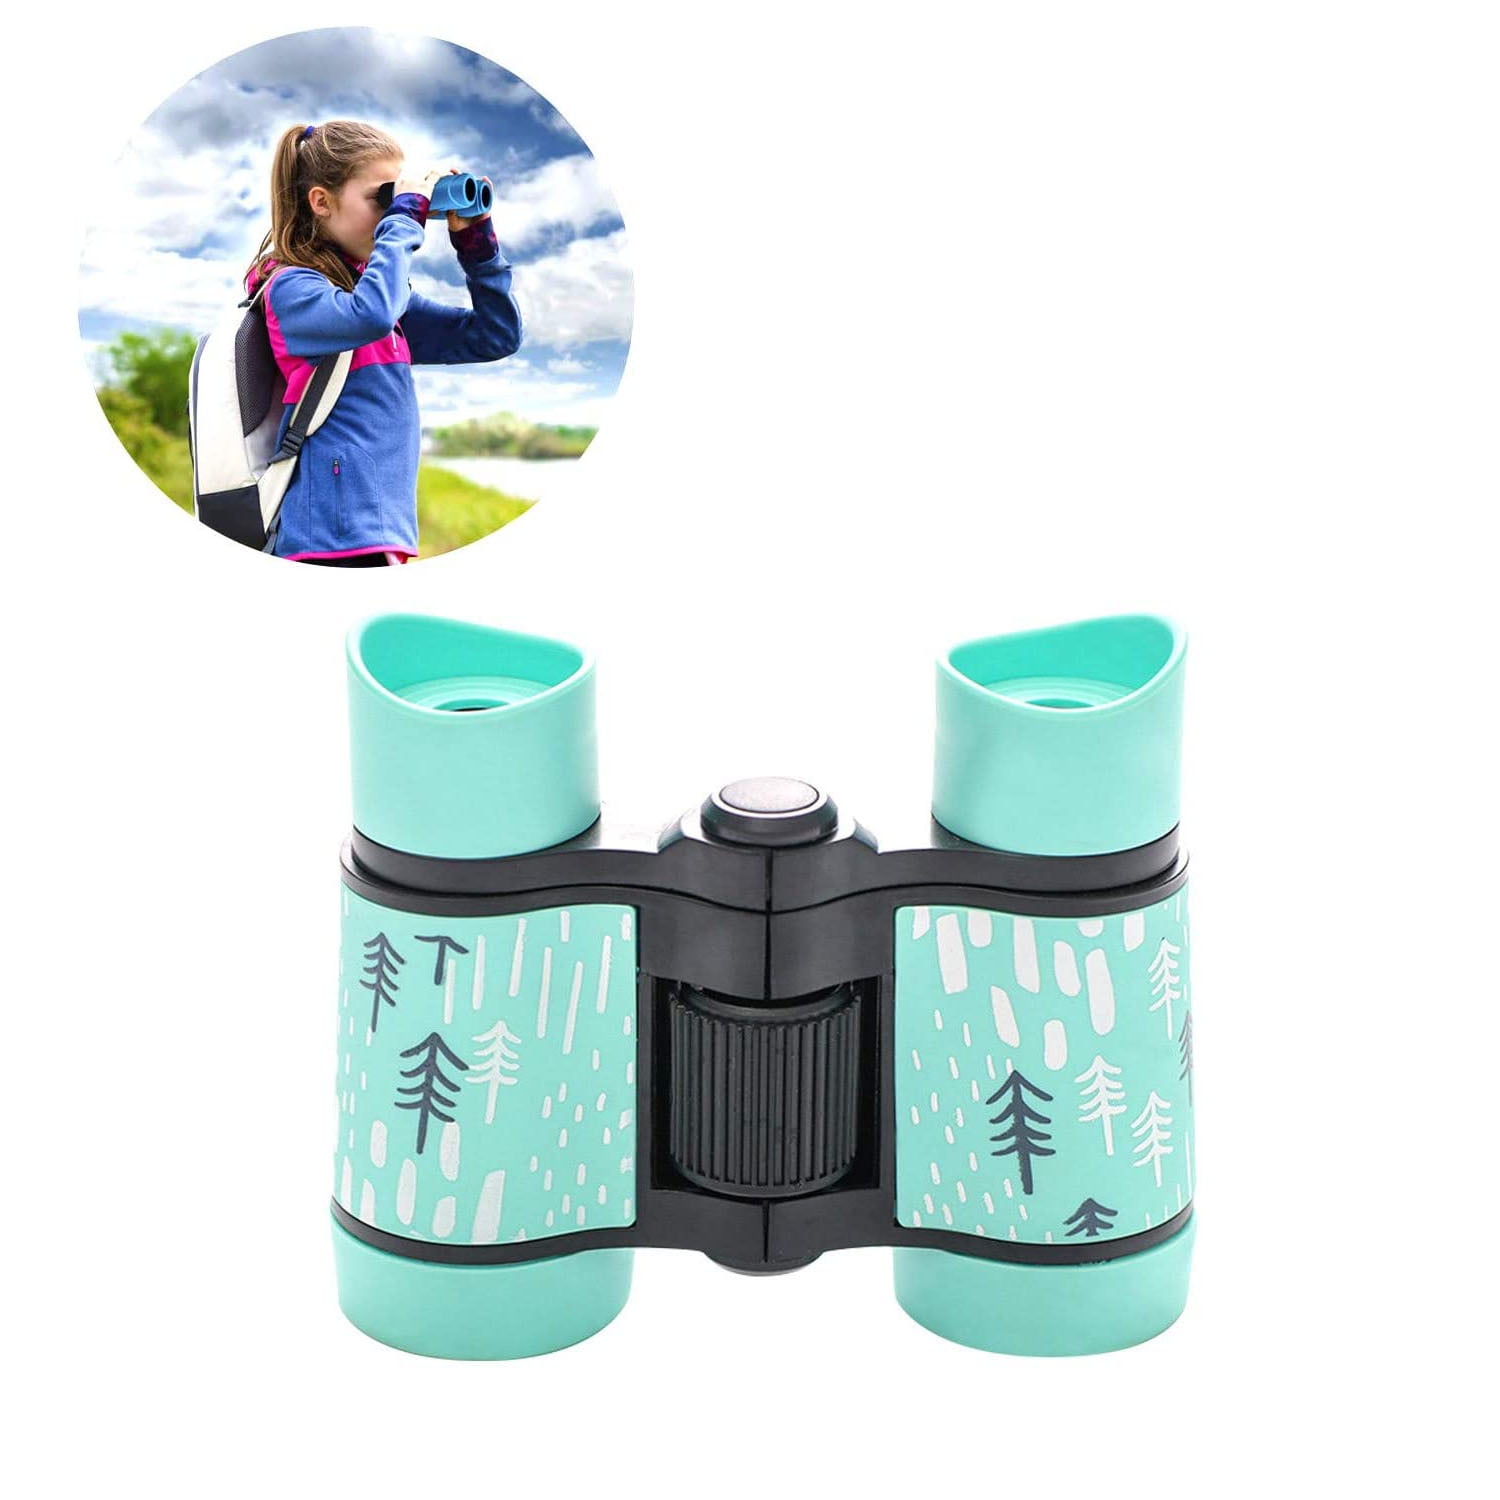 12 Ball-Shaped Binoculars For Kids Birthday Party Favor 